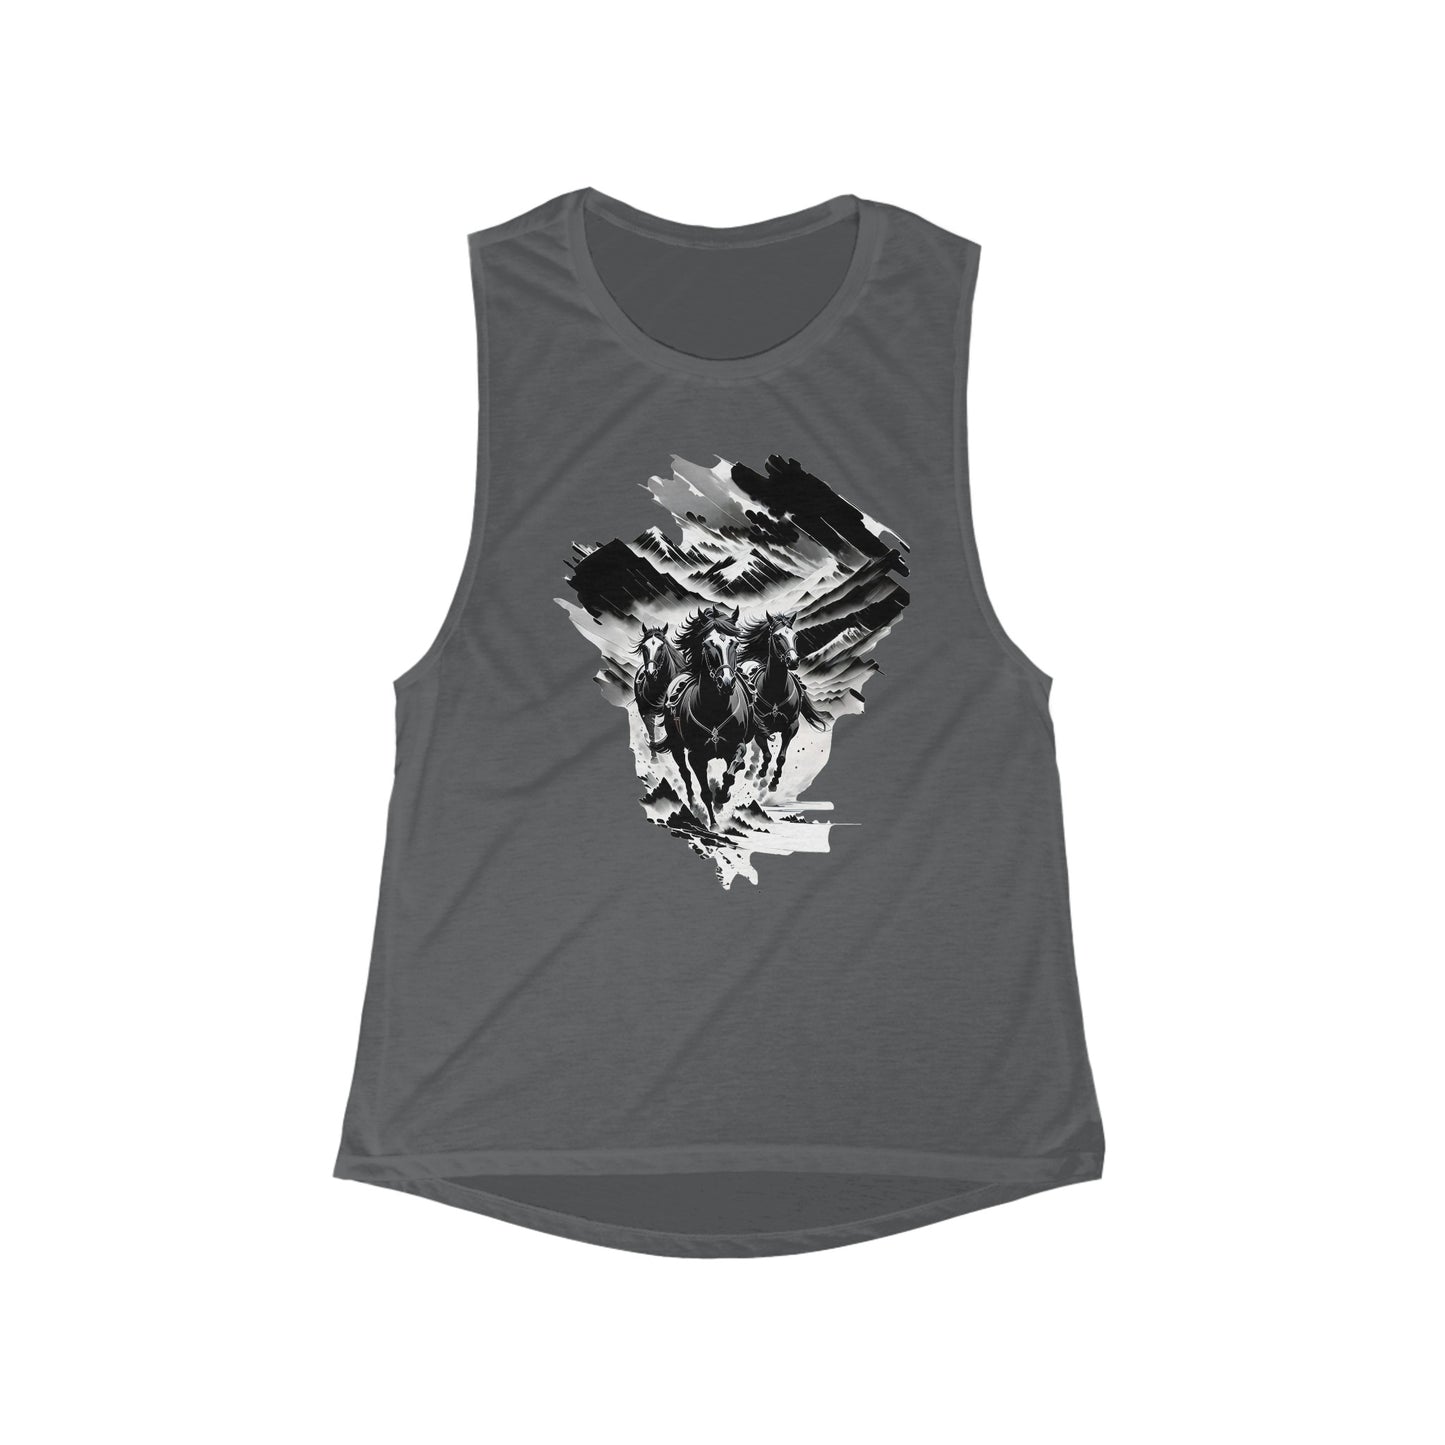 Three Horses Galloping Through Canyon Women's Flowy Scoop Muscle Tank